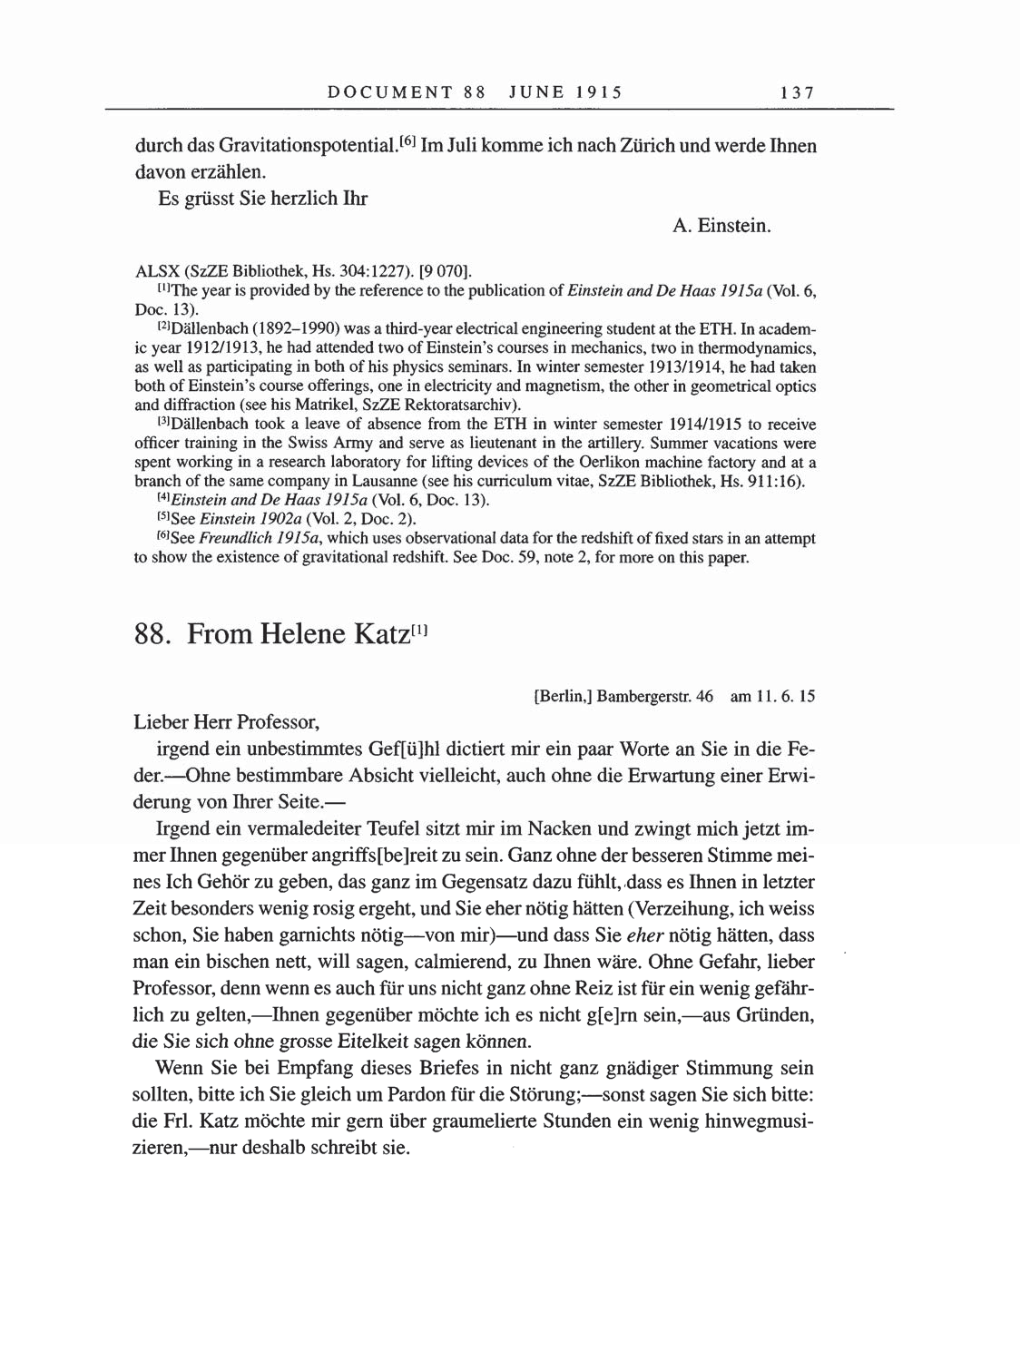 Volume 8, Part A: The Berlin Years: Correspondence 1914-1917 page 137